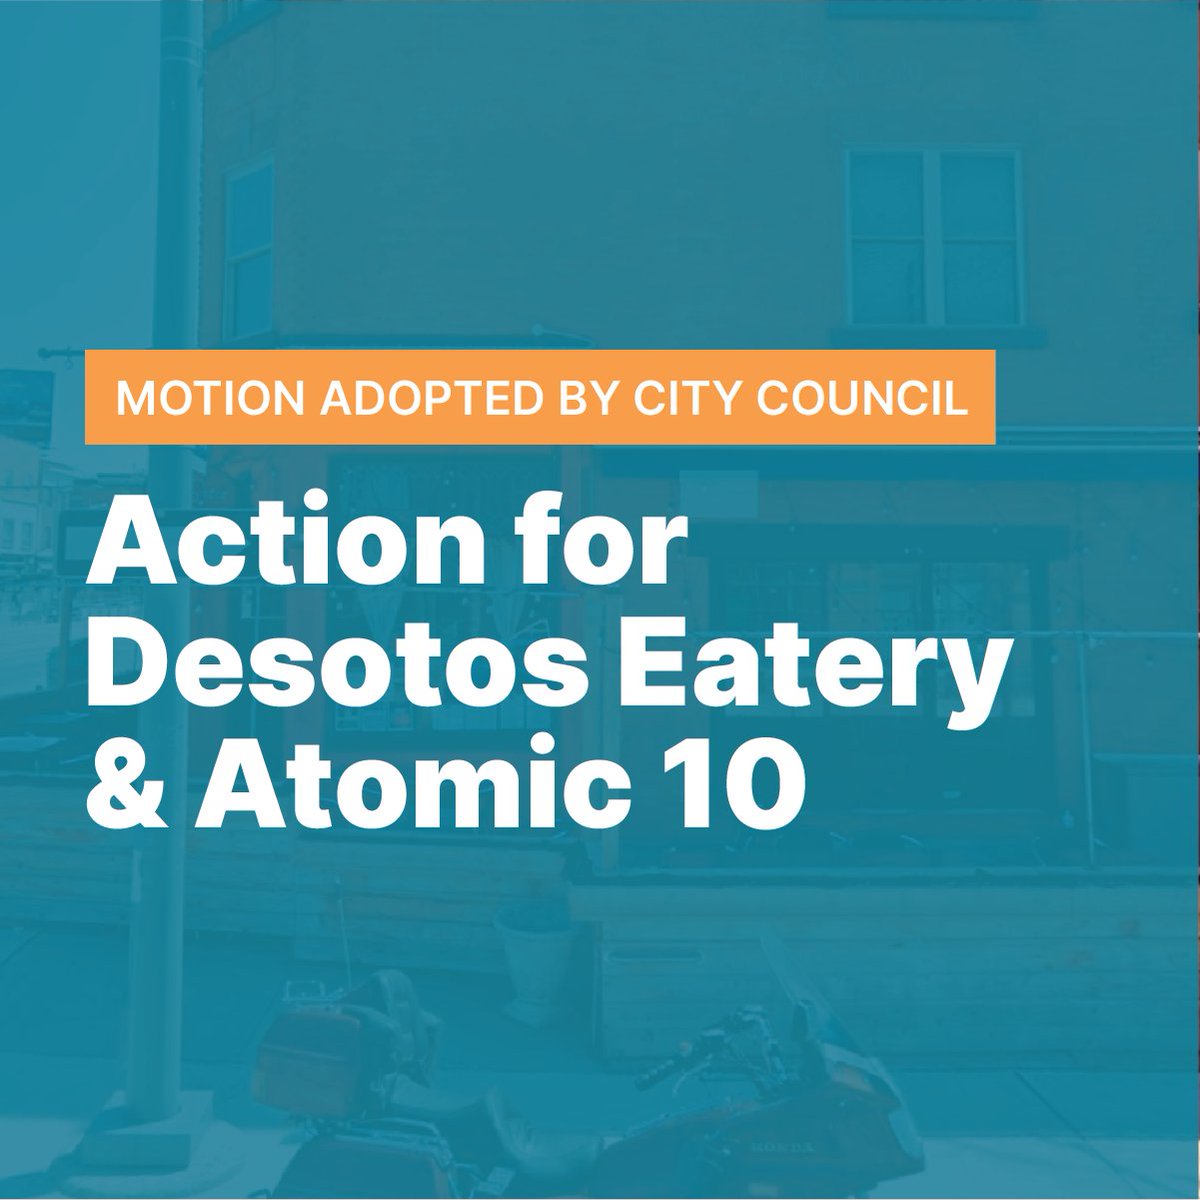 City Council approved my motion to take action to help Desotos Eatery & Atomic 10 keep their patio open. My team and I are continuing to support Desotos Eatery & Atomic 10, with thanks to all those residents who have spoken up for this local gem.